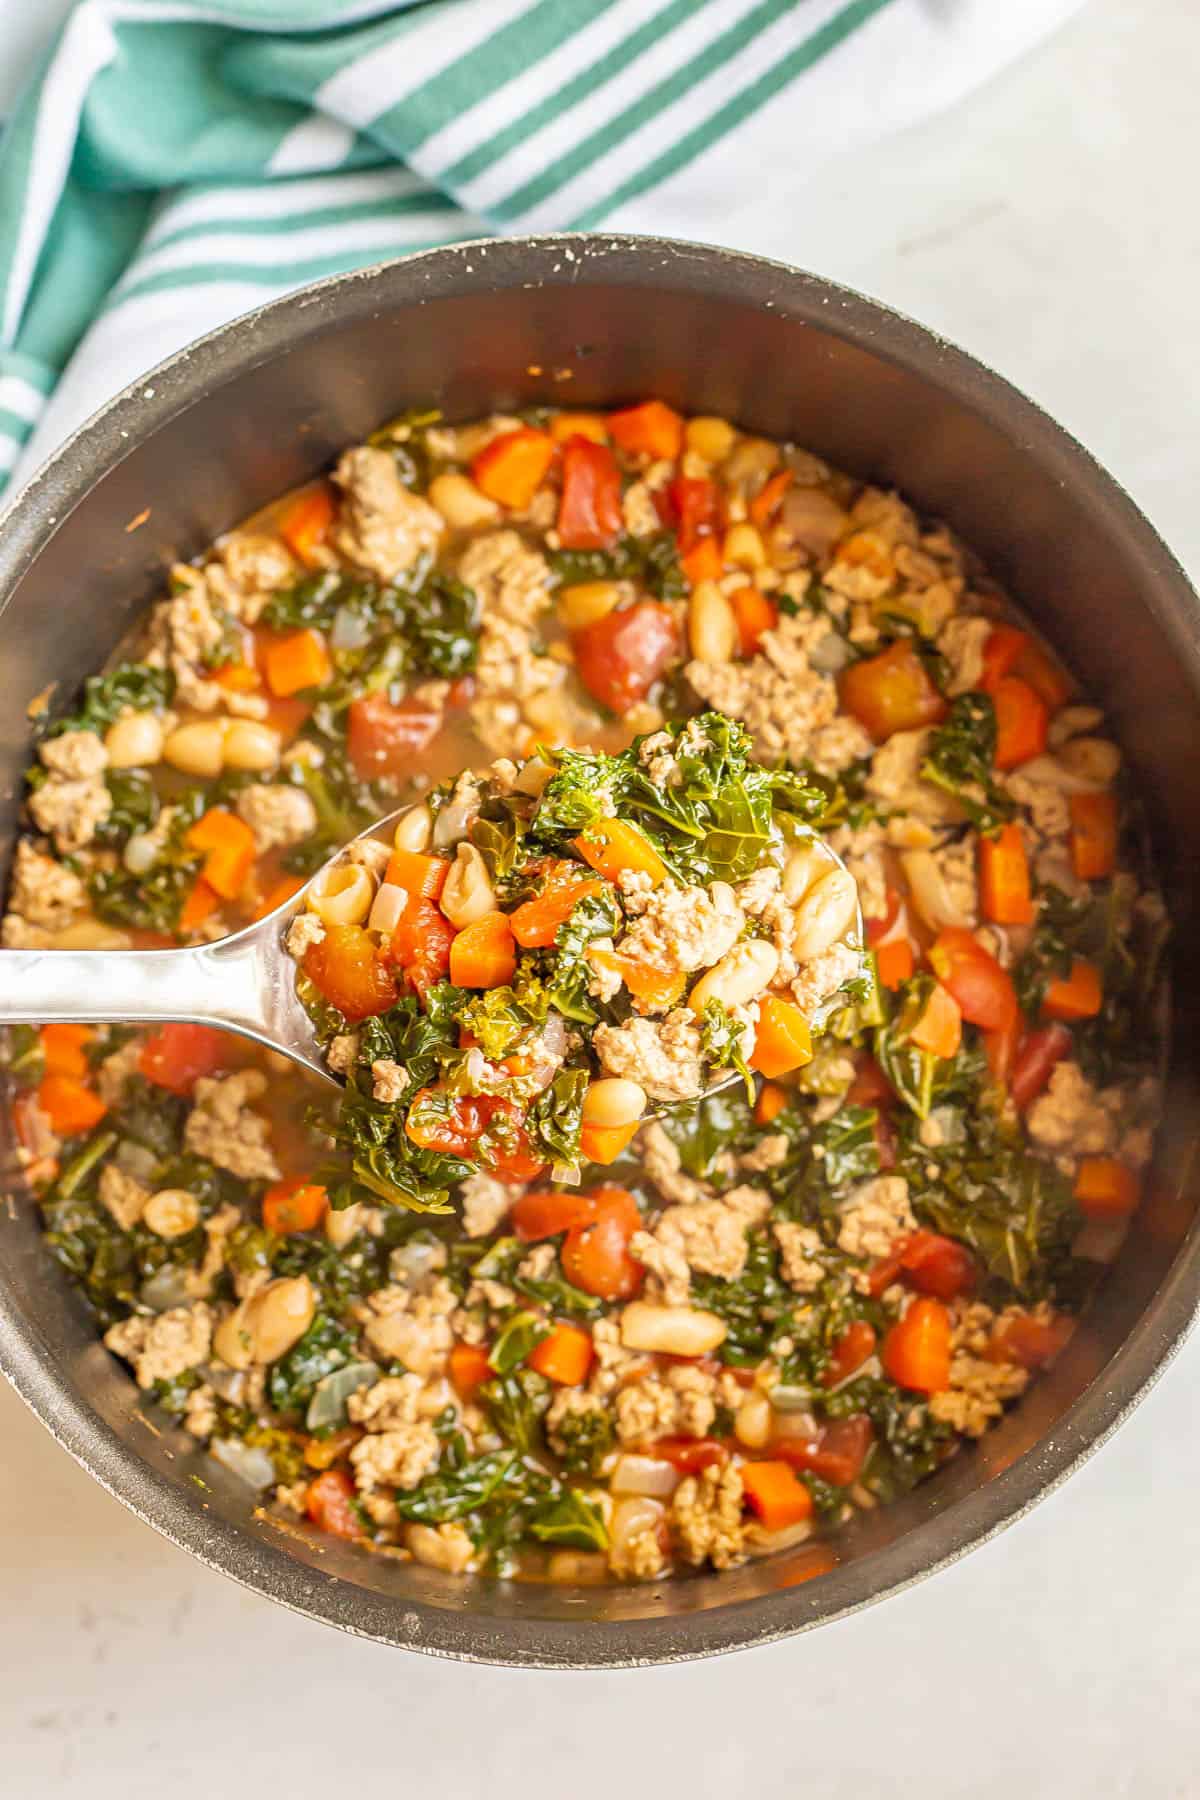 A scoop being held up from a large pot of soup with ground turkey, tomatoes, carrots and kale.